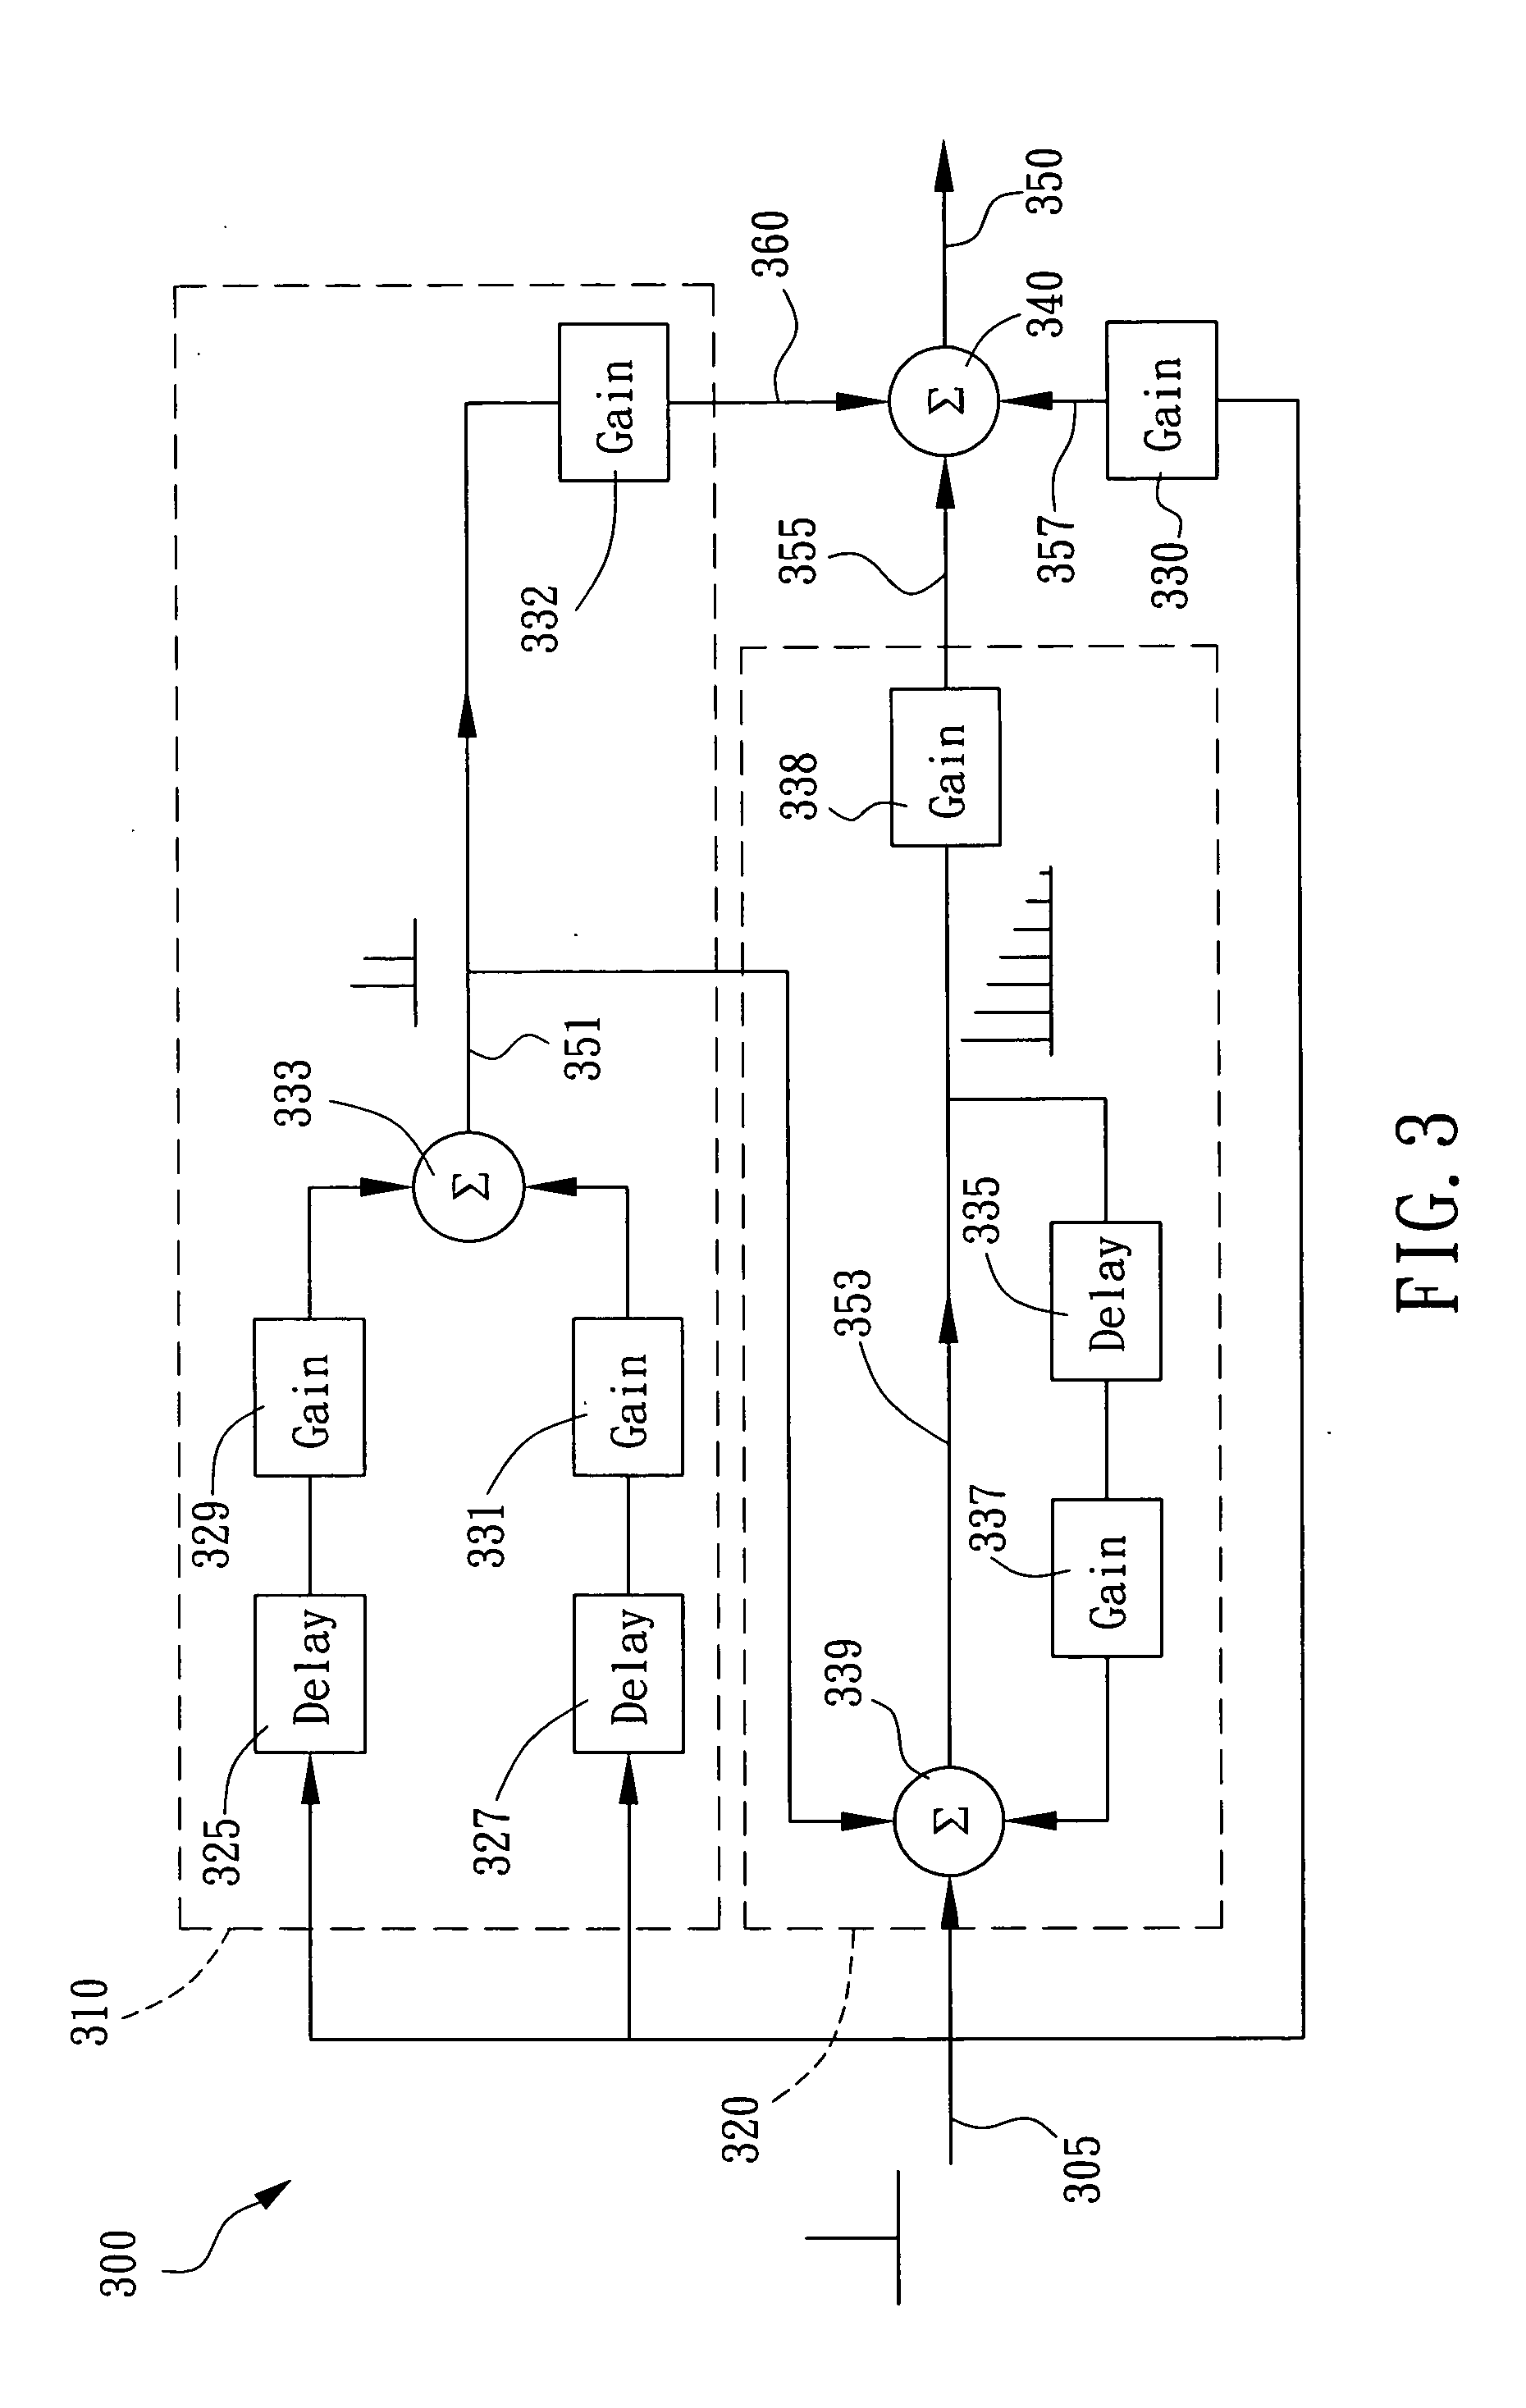 Method and apparatus for emulating audio effect